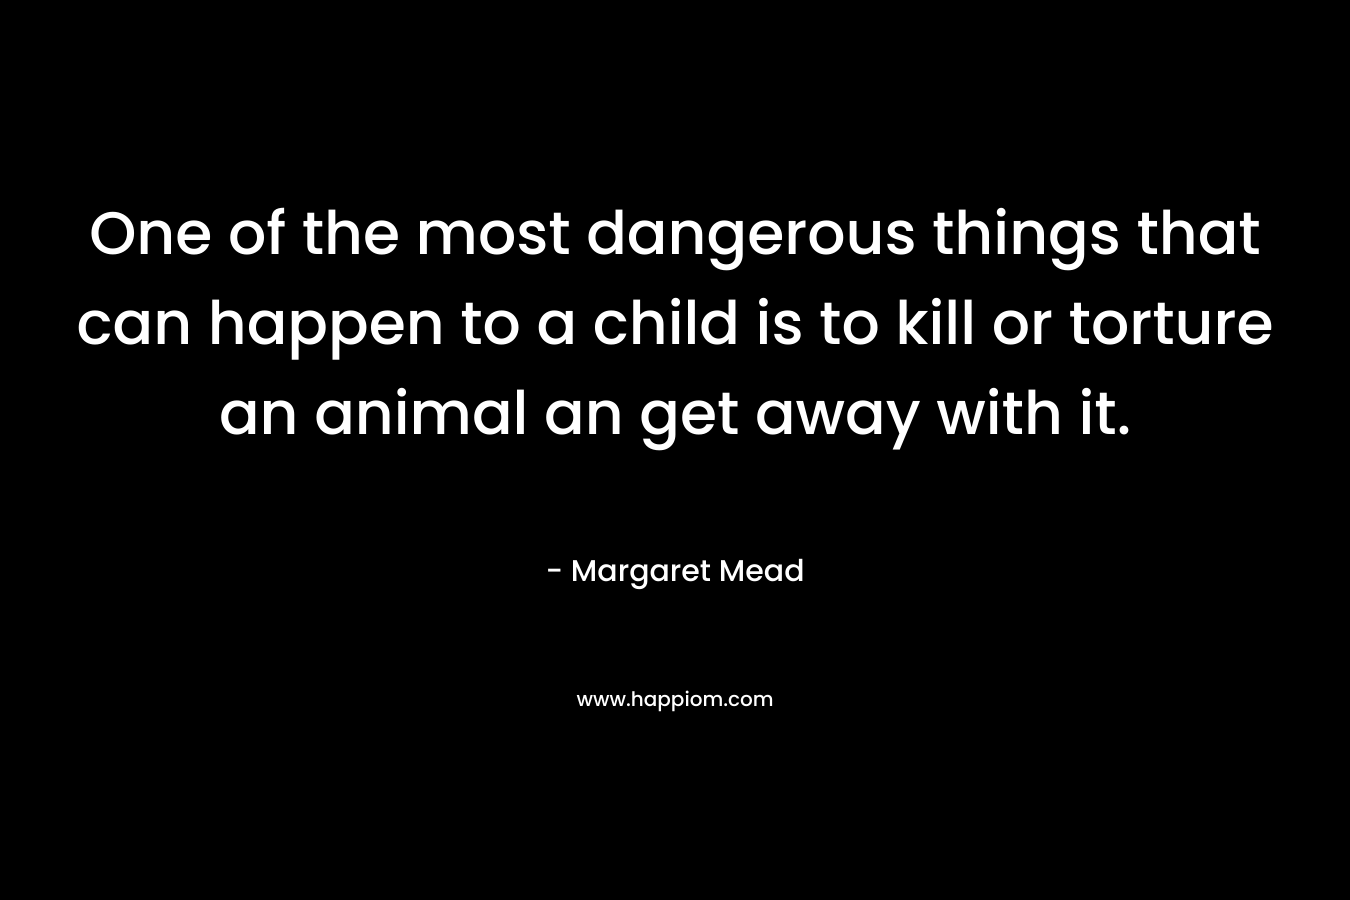 One of the most dangerous things that can happen to a child is to kill or torture an animal an get away with it.